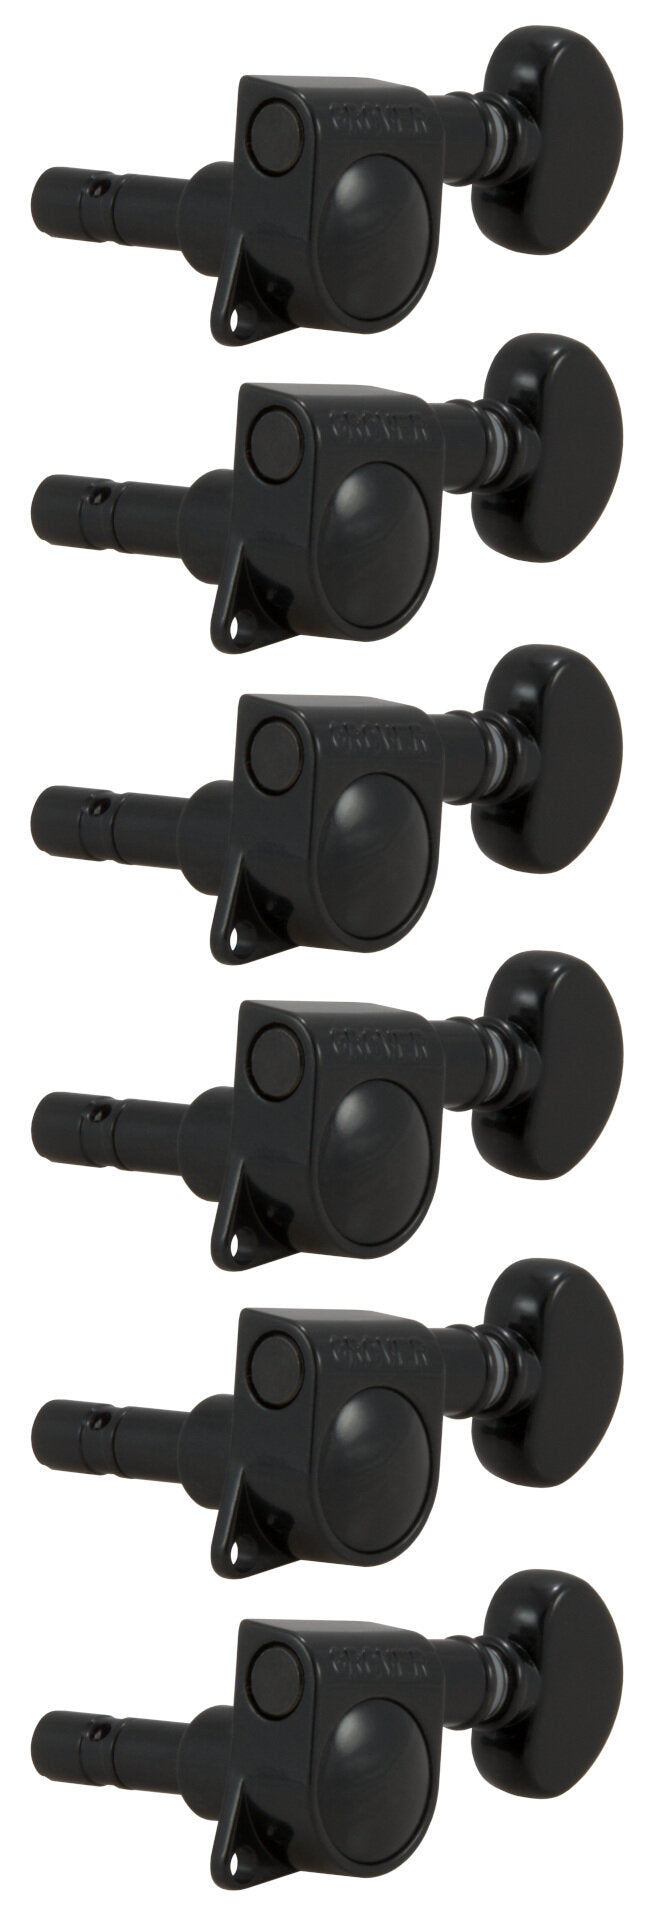 Grover 406BC6 Mini Locking Rotomatics with Round Button - Guitar Machine Heads, 6-in-Line, Bass Side (Left) - Black Chrome